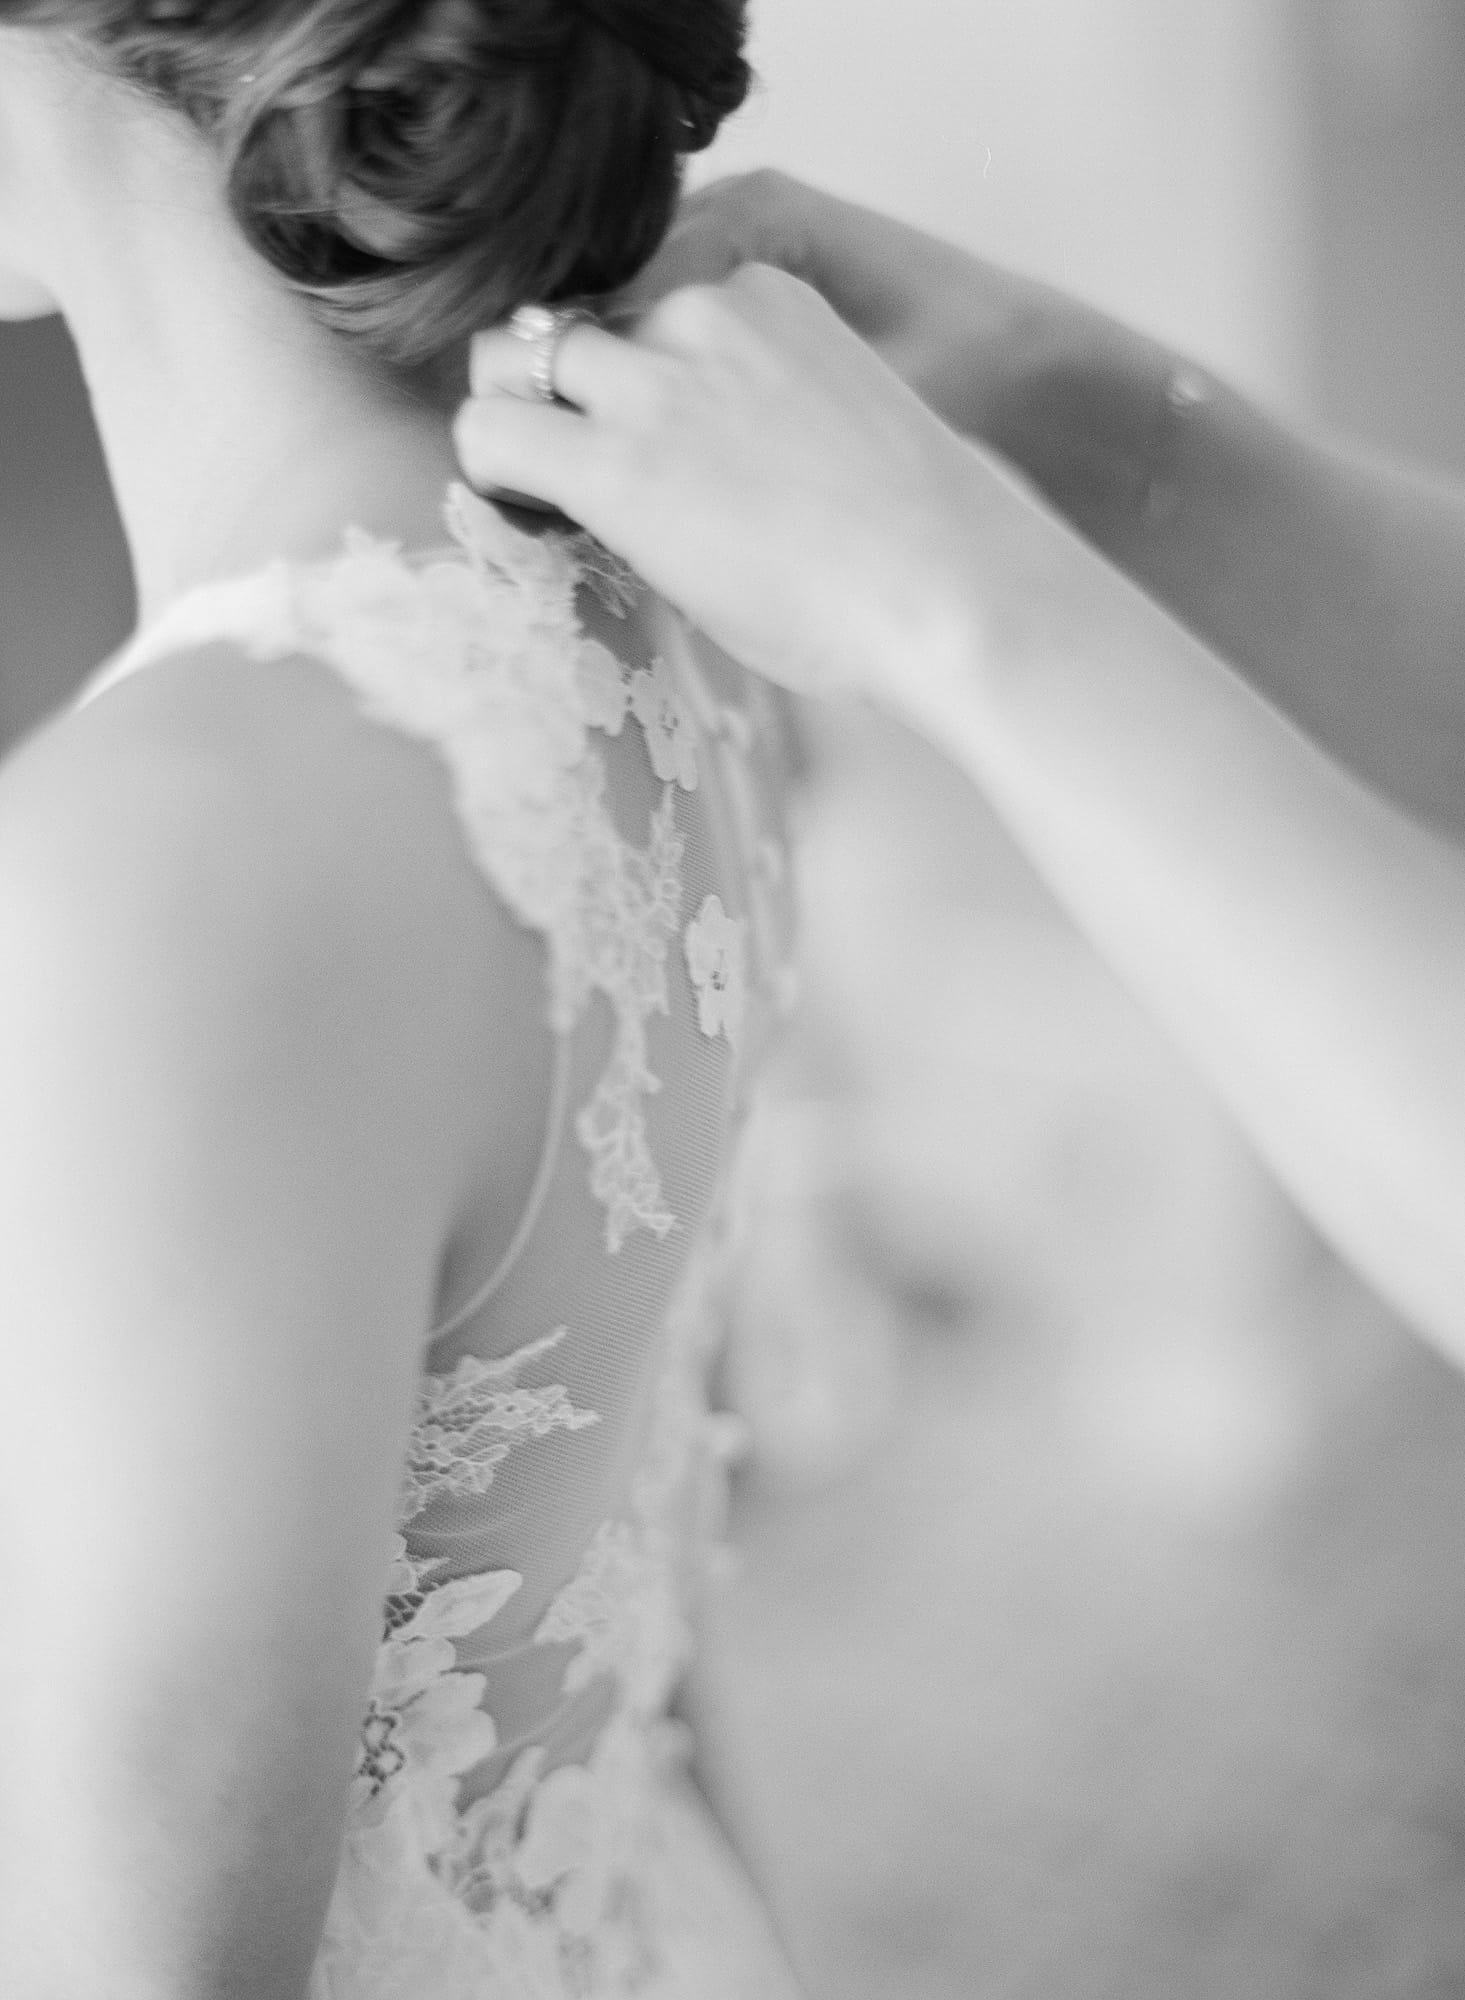 A black and white image of person buttoning a woman into her wedding dress.